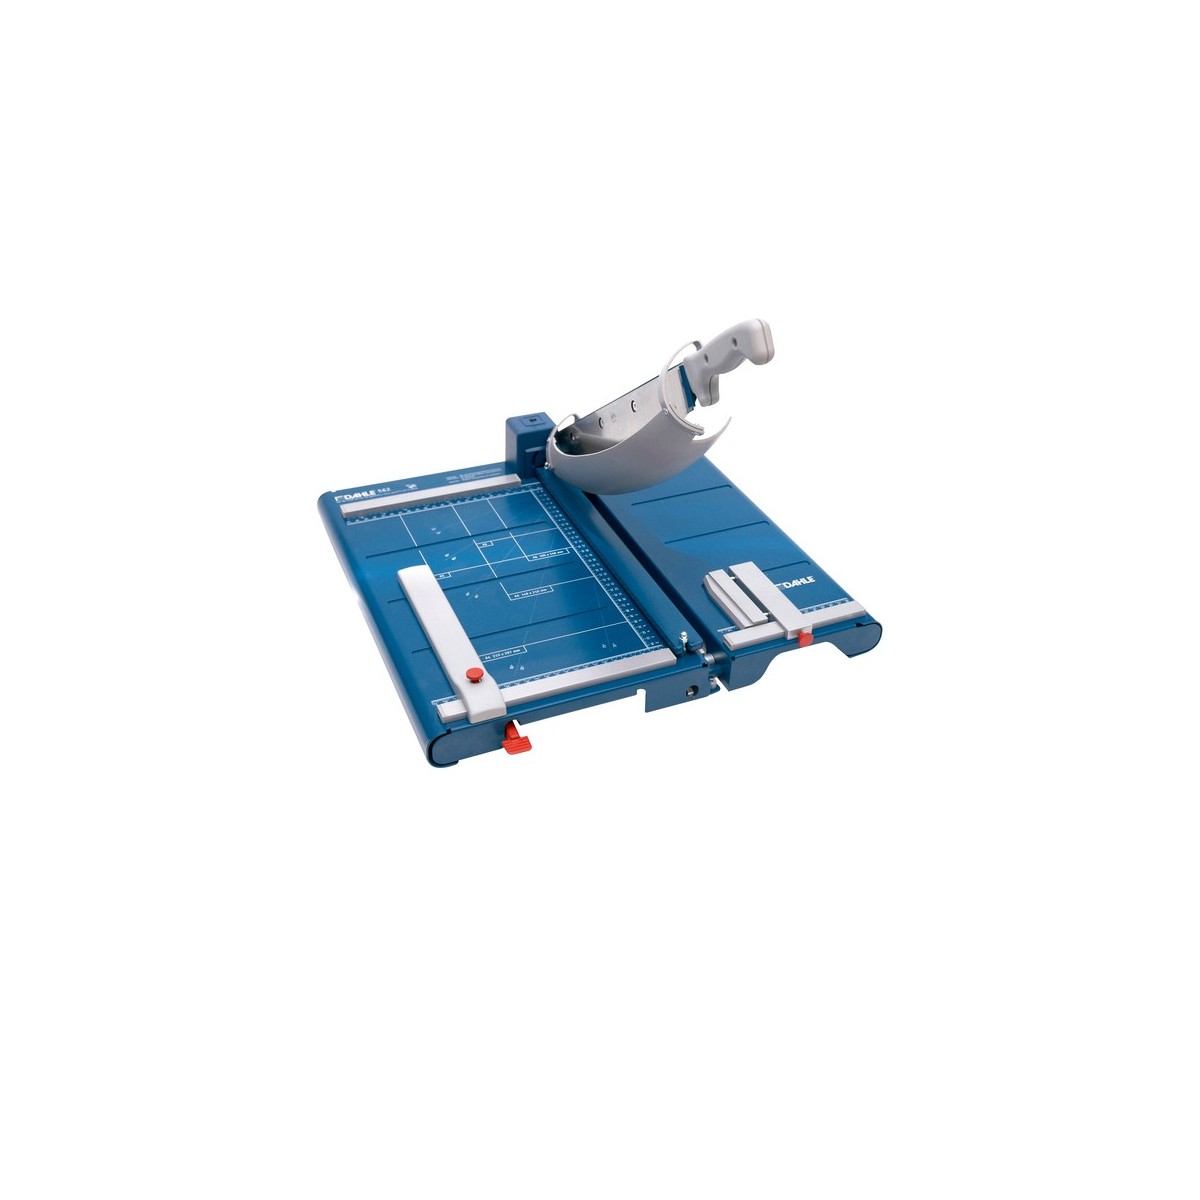 Novus Dahle Dahle Precision guillotine with user-friendly features - 3.5 mm - 35 sheets - 36 cm - Automatic clamp - Steel - A4